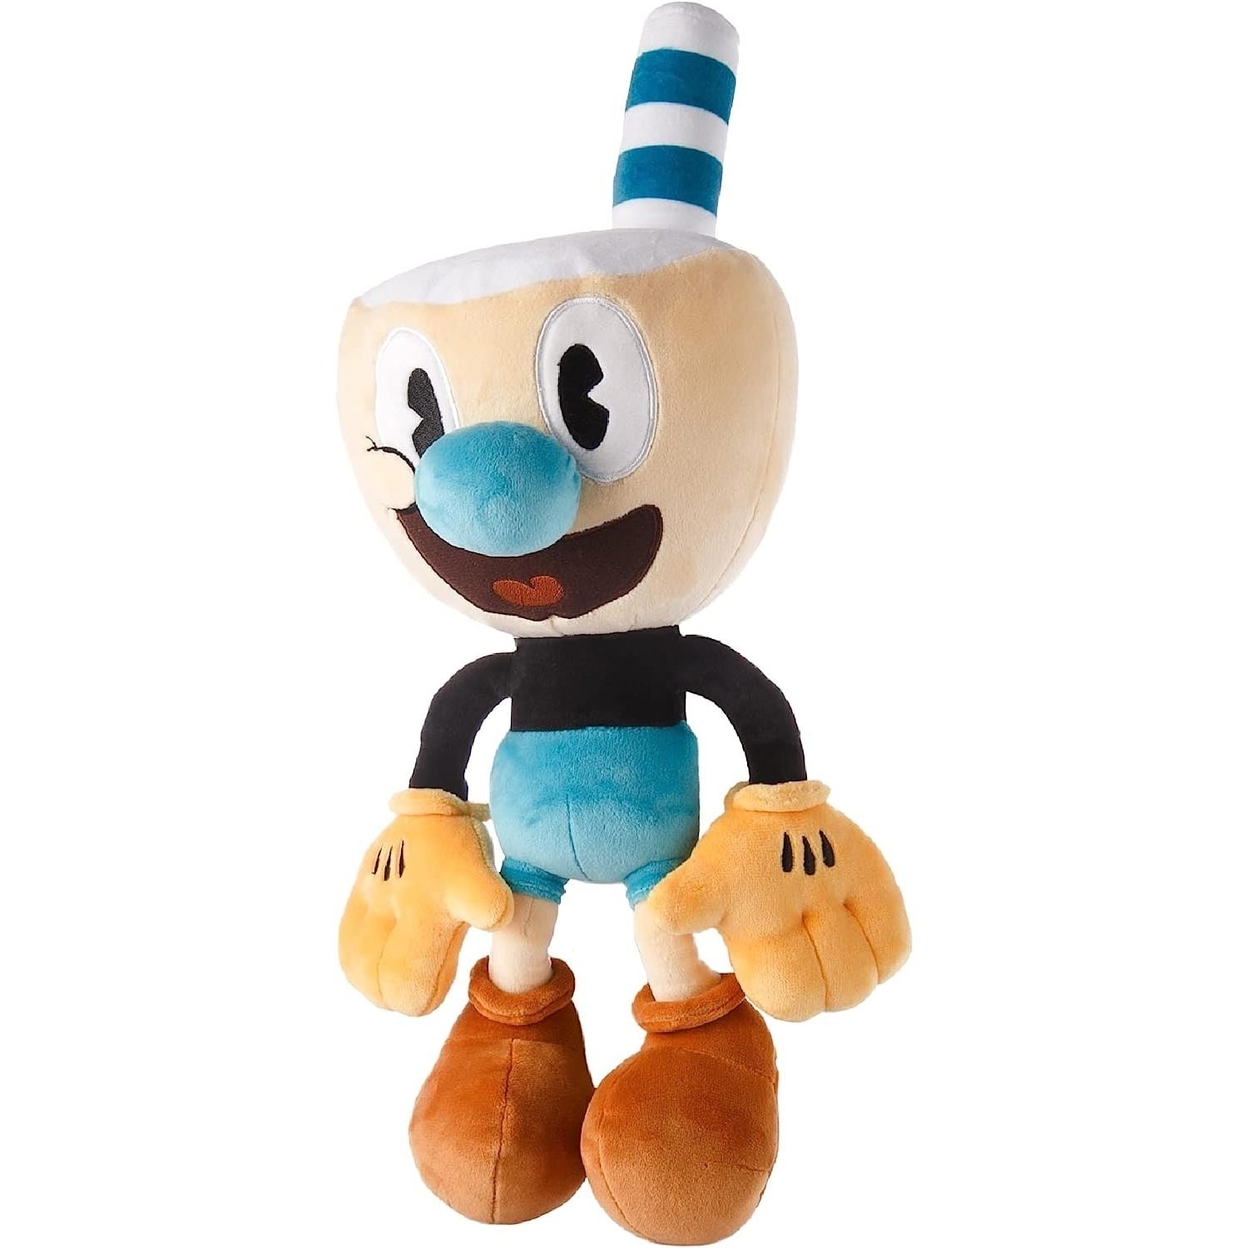 The Cuphead Show Mugman Plush Doll 15 Animated Series Character Soft Toy Mighty Mojo